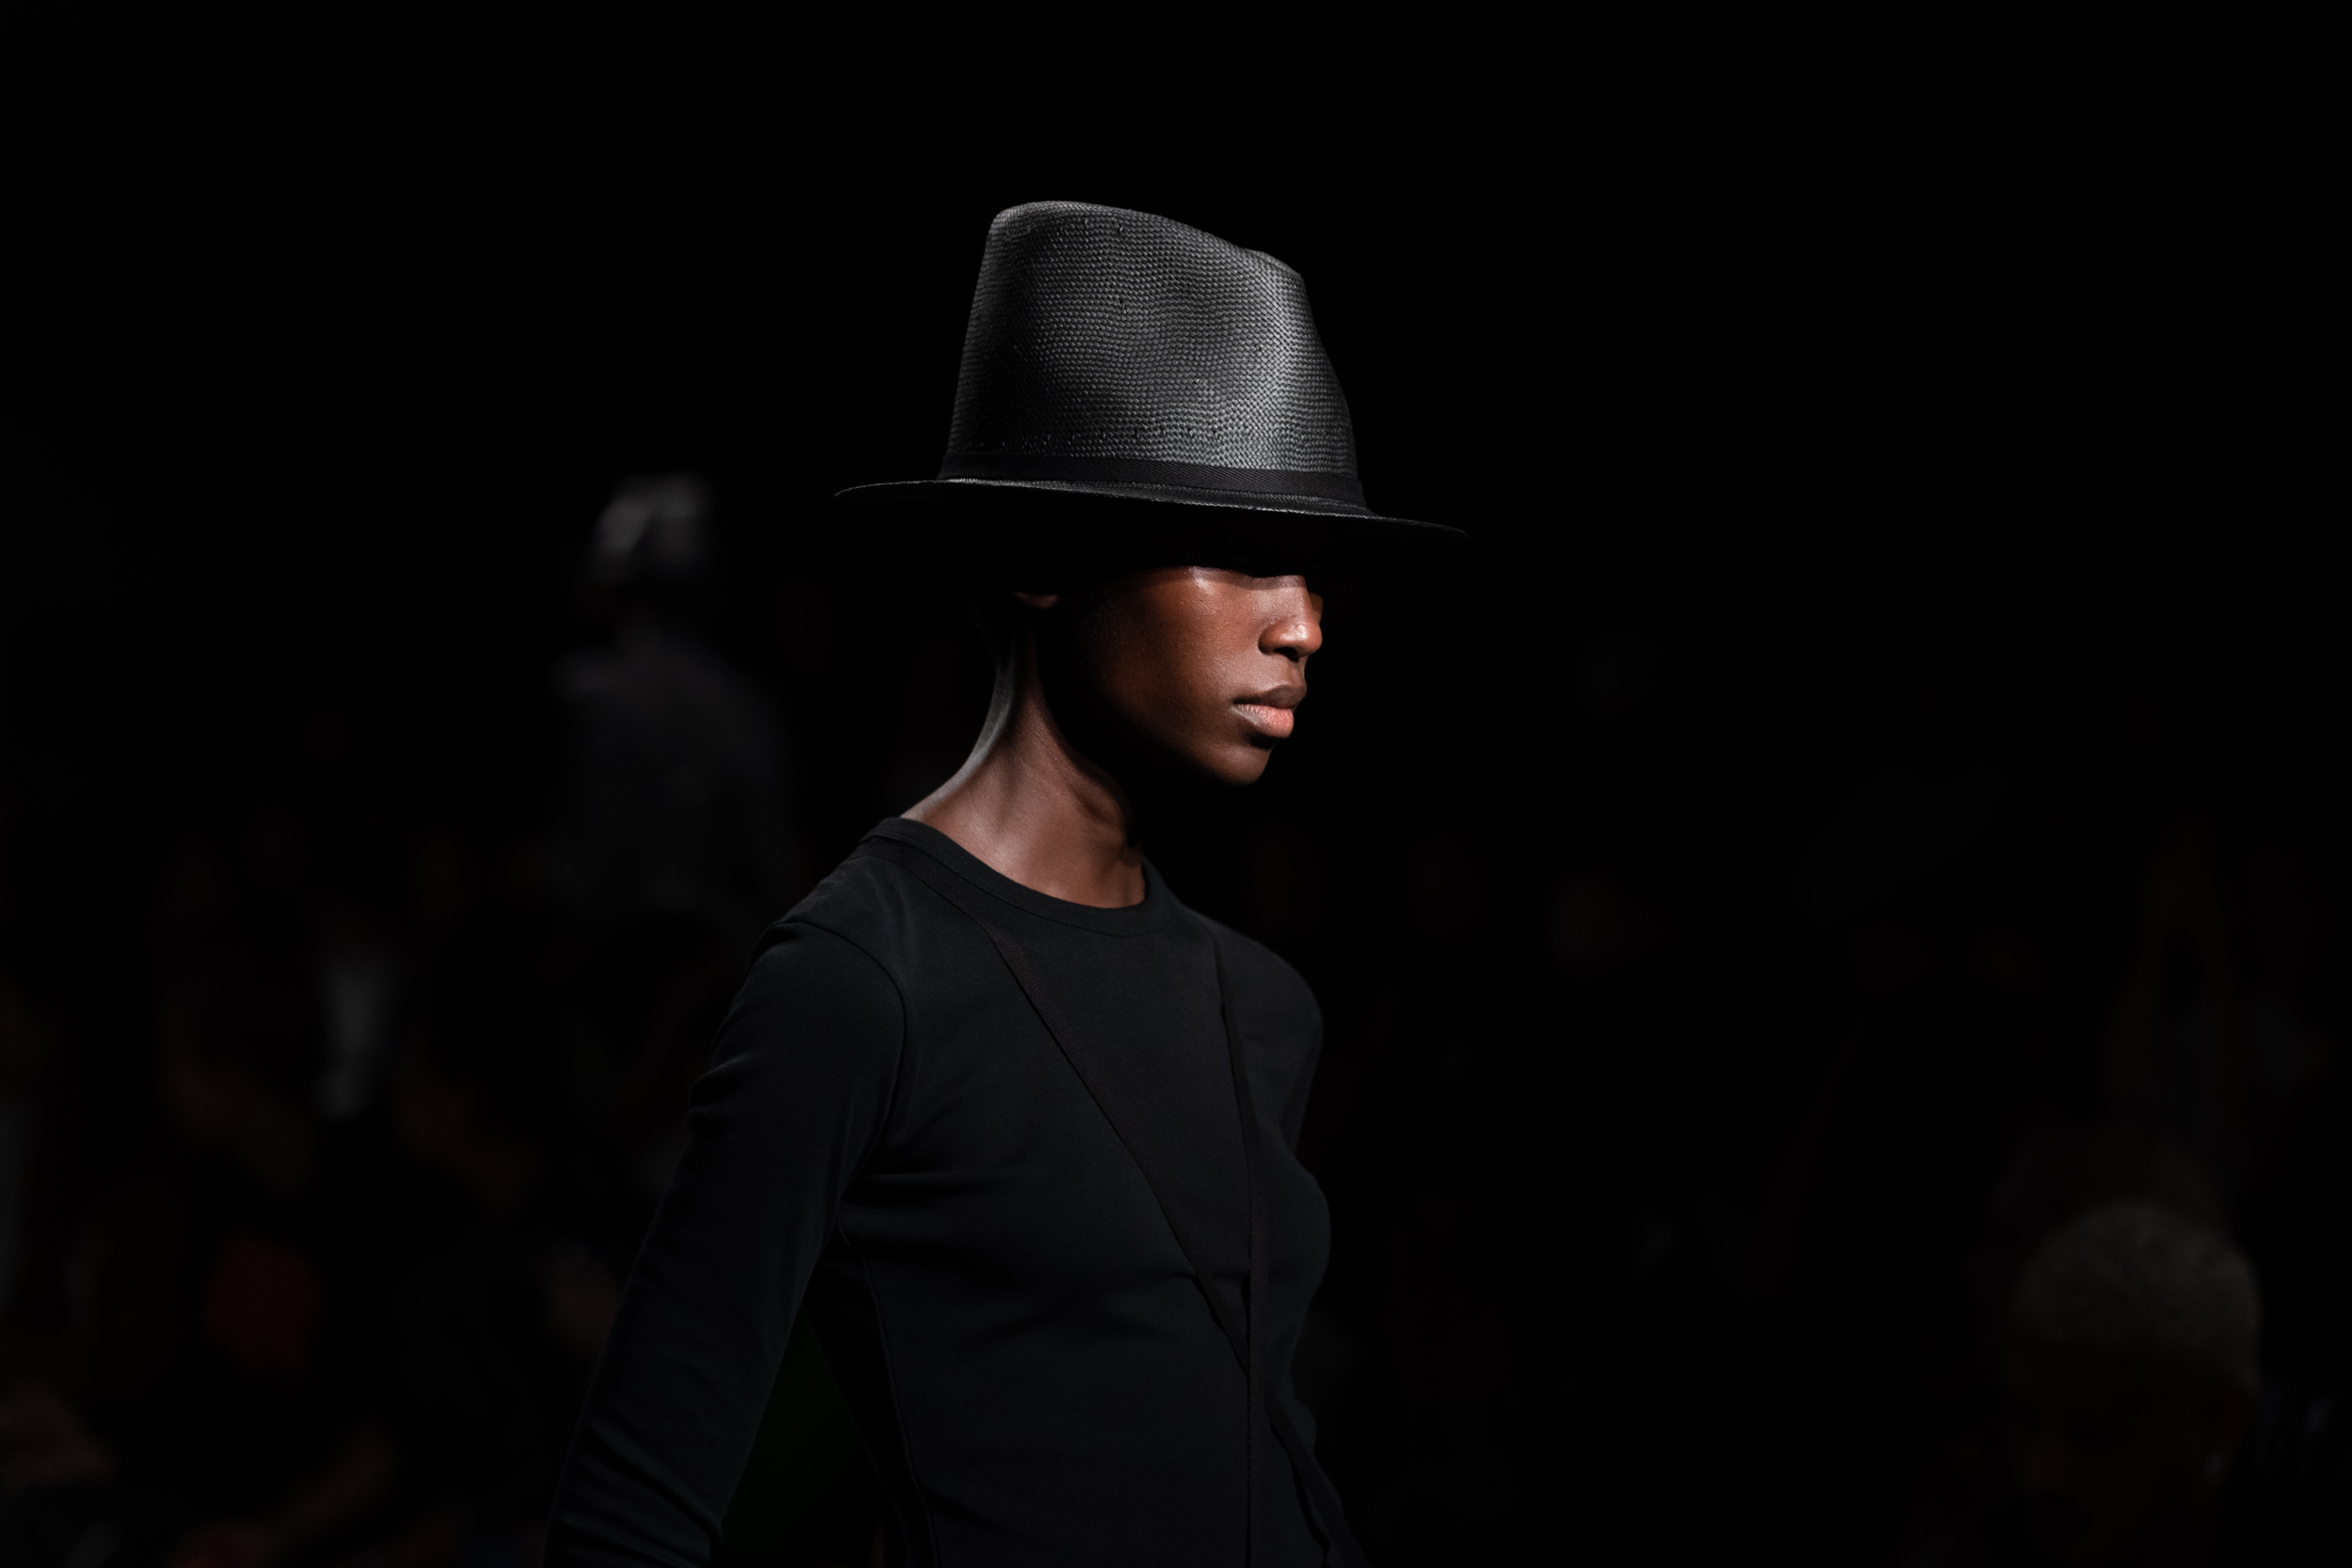 Ann Demeulemeester Spring 2023 Fashion Show Atmosphere